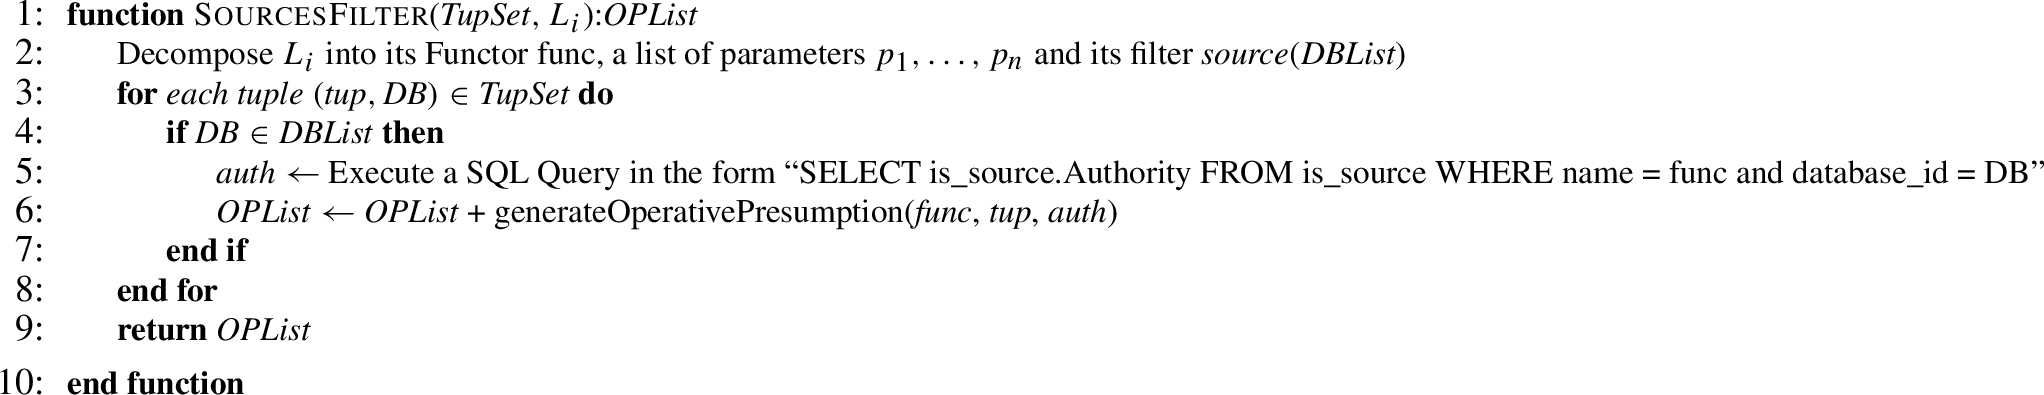 Sources filter function